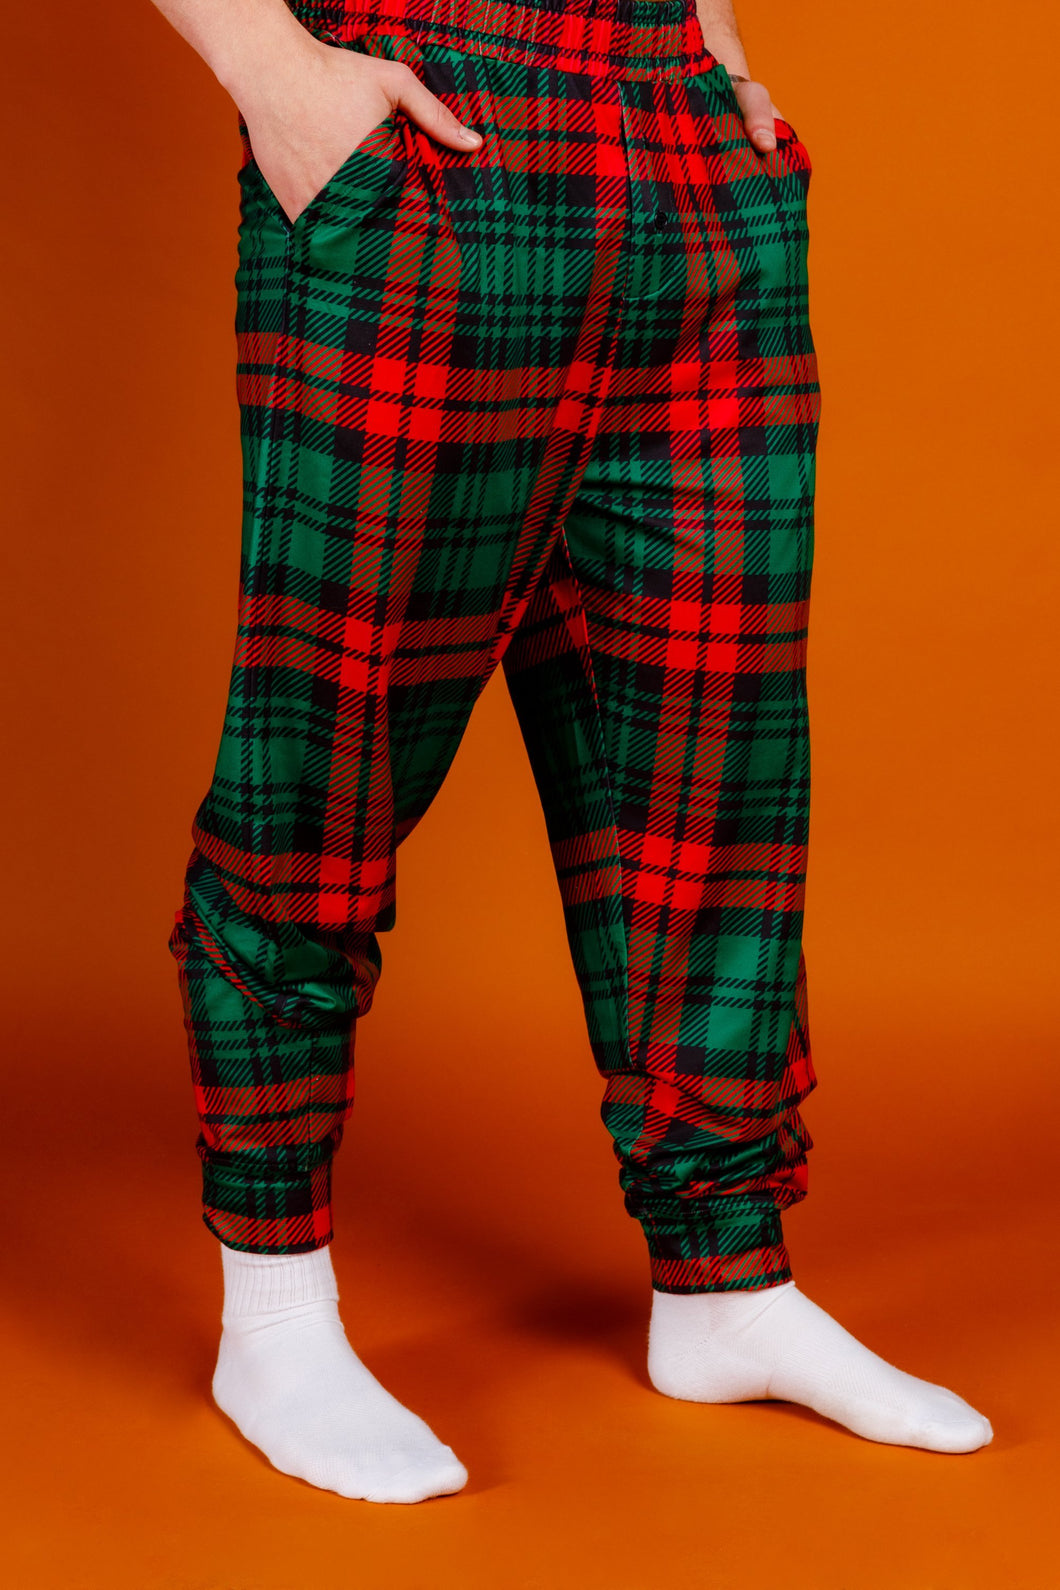 Men's red and green plaid pajama bottoms